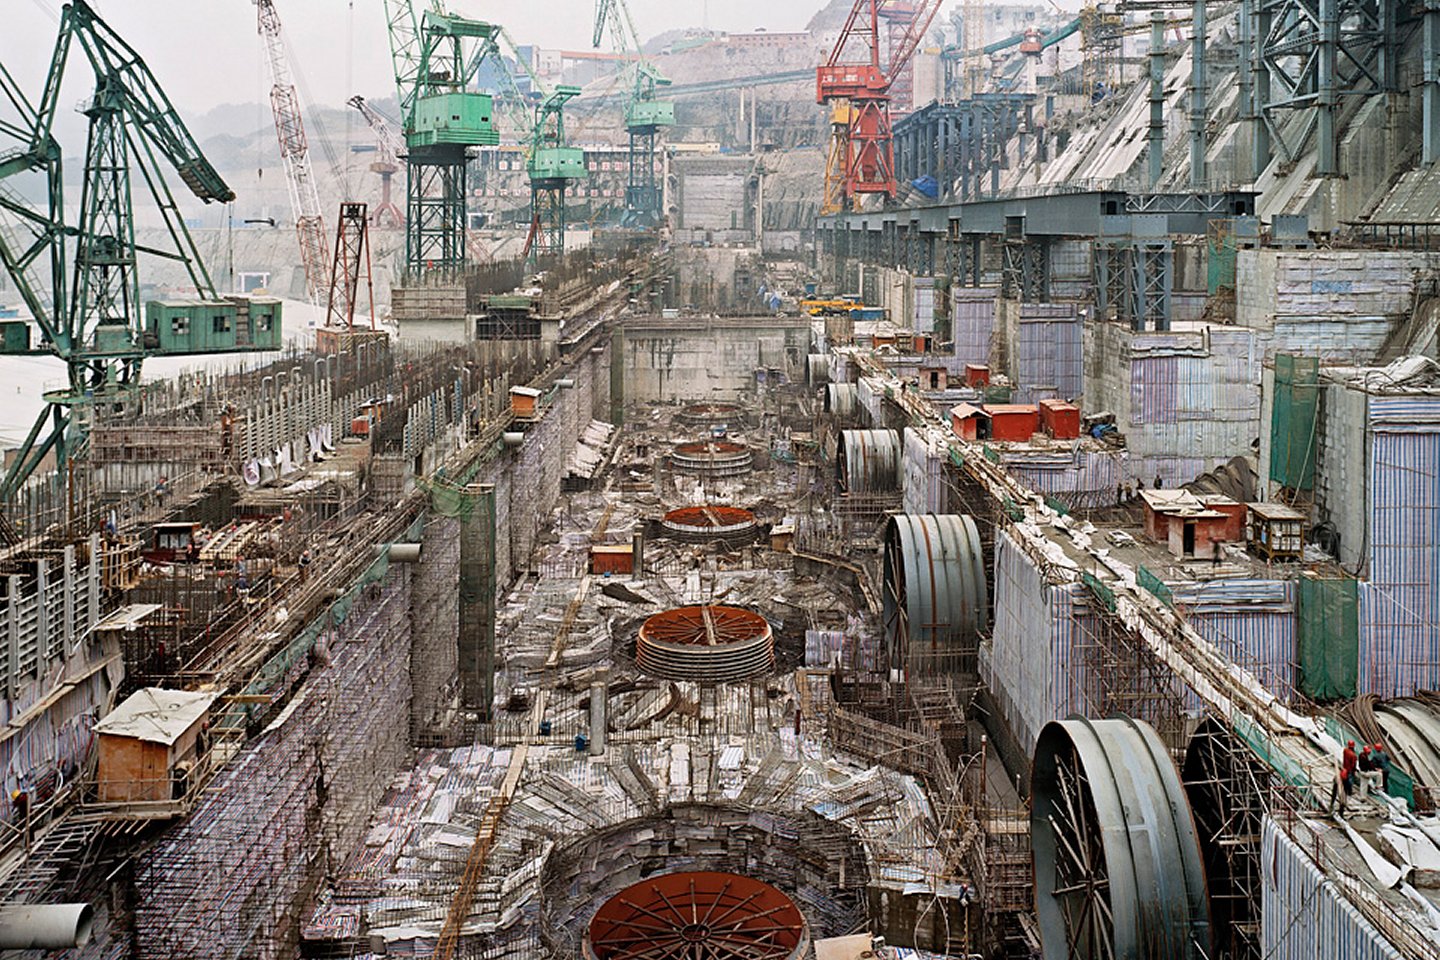 Stakeholders of the three gorges dam project